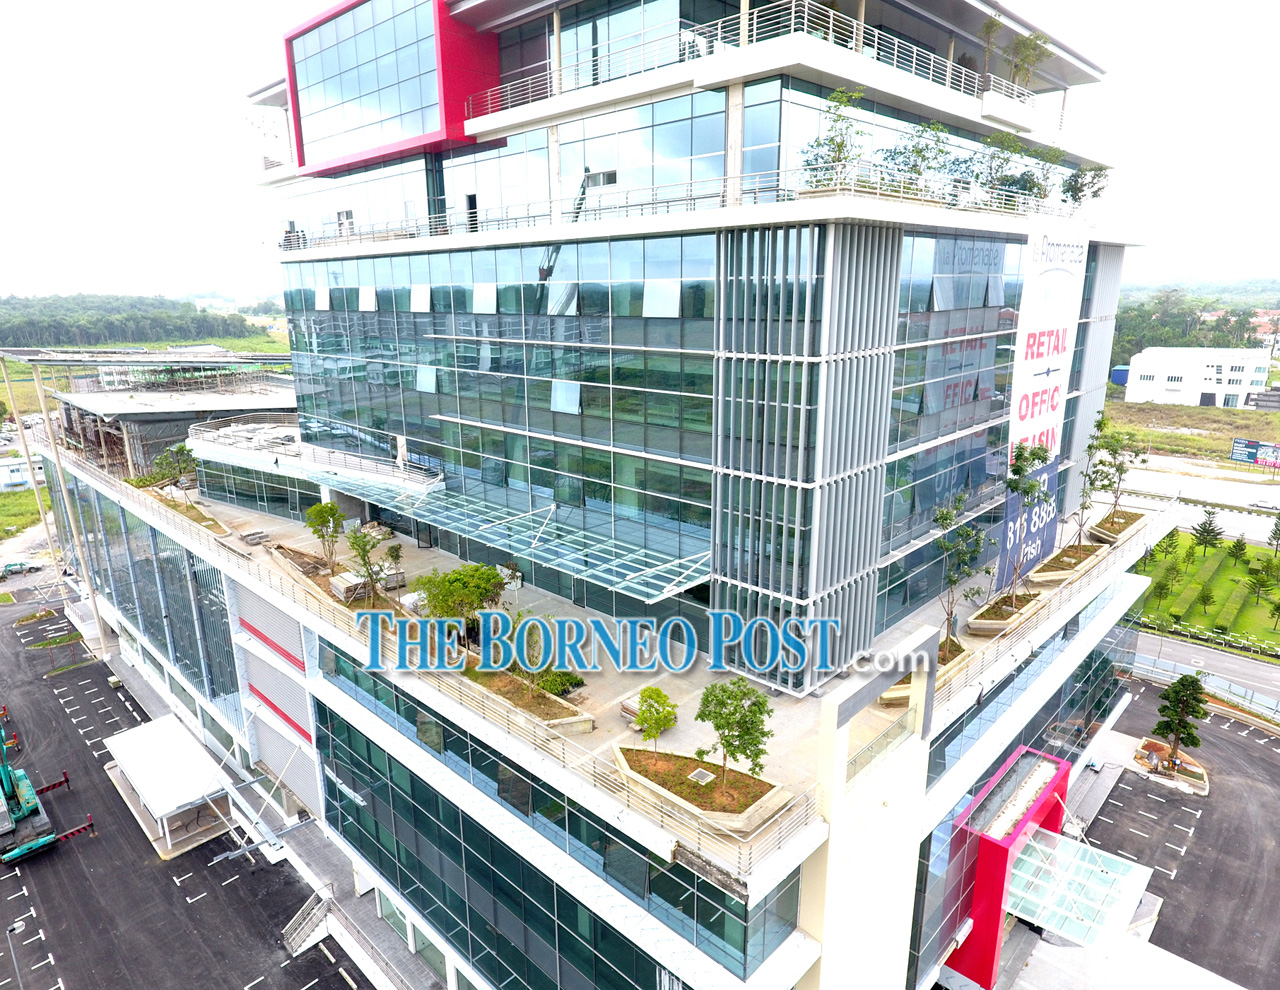 Buildings going 'green' to mitigate global warming - The Borneo Post